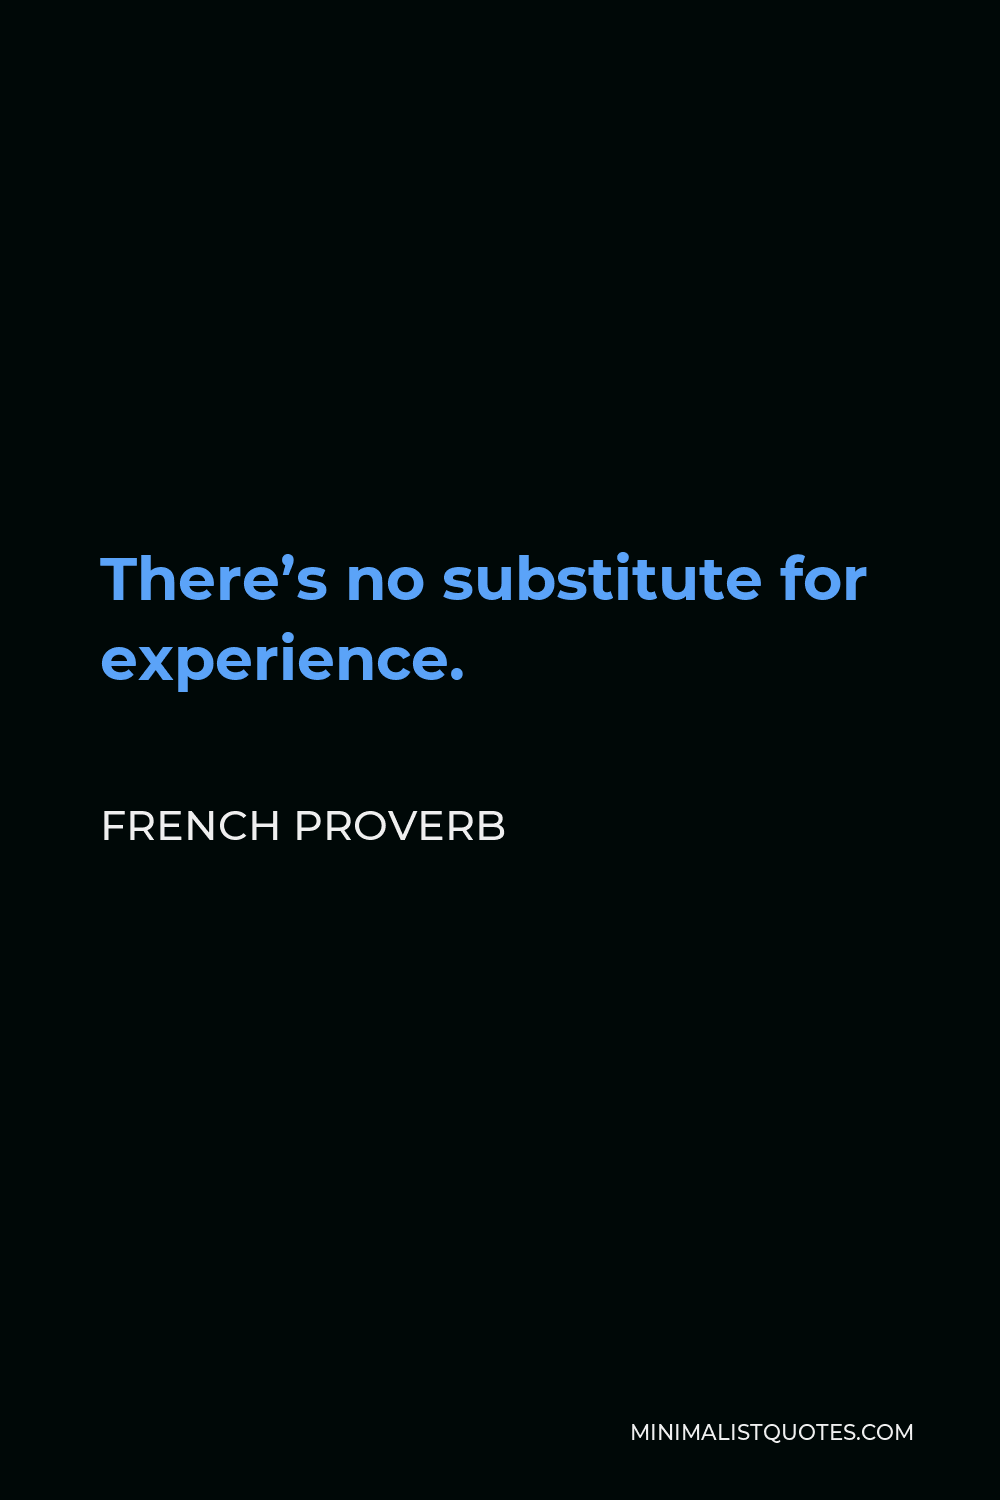 French Proverb Quote - There’s no substitute for experience.